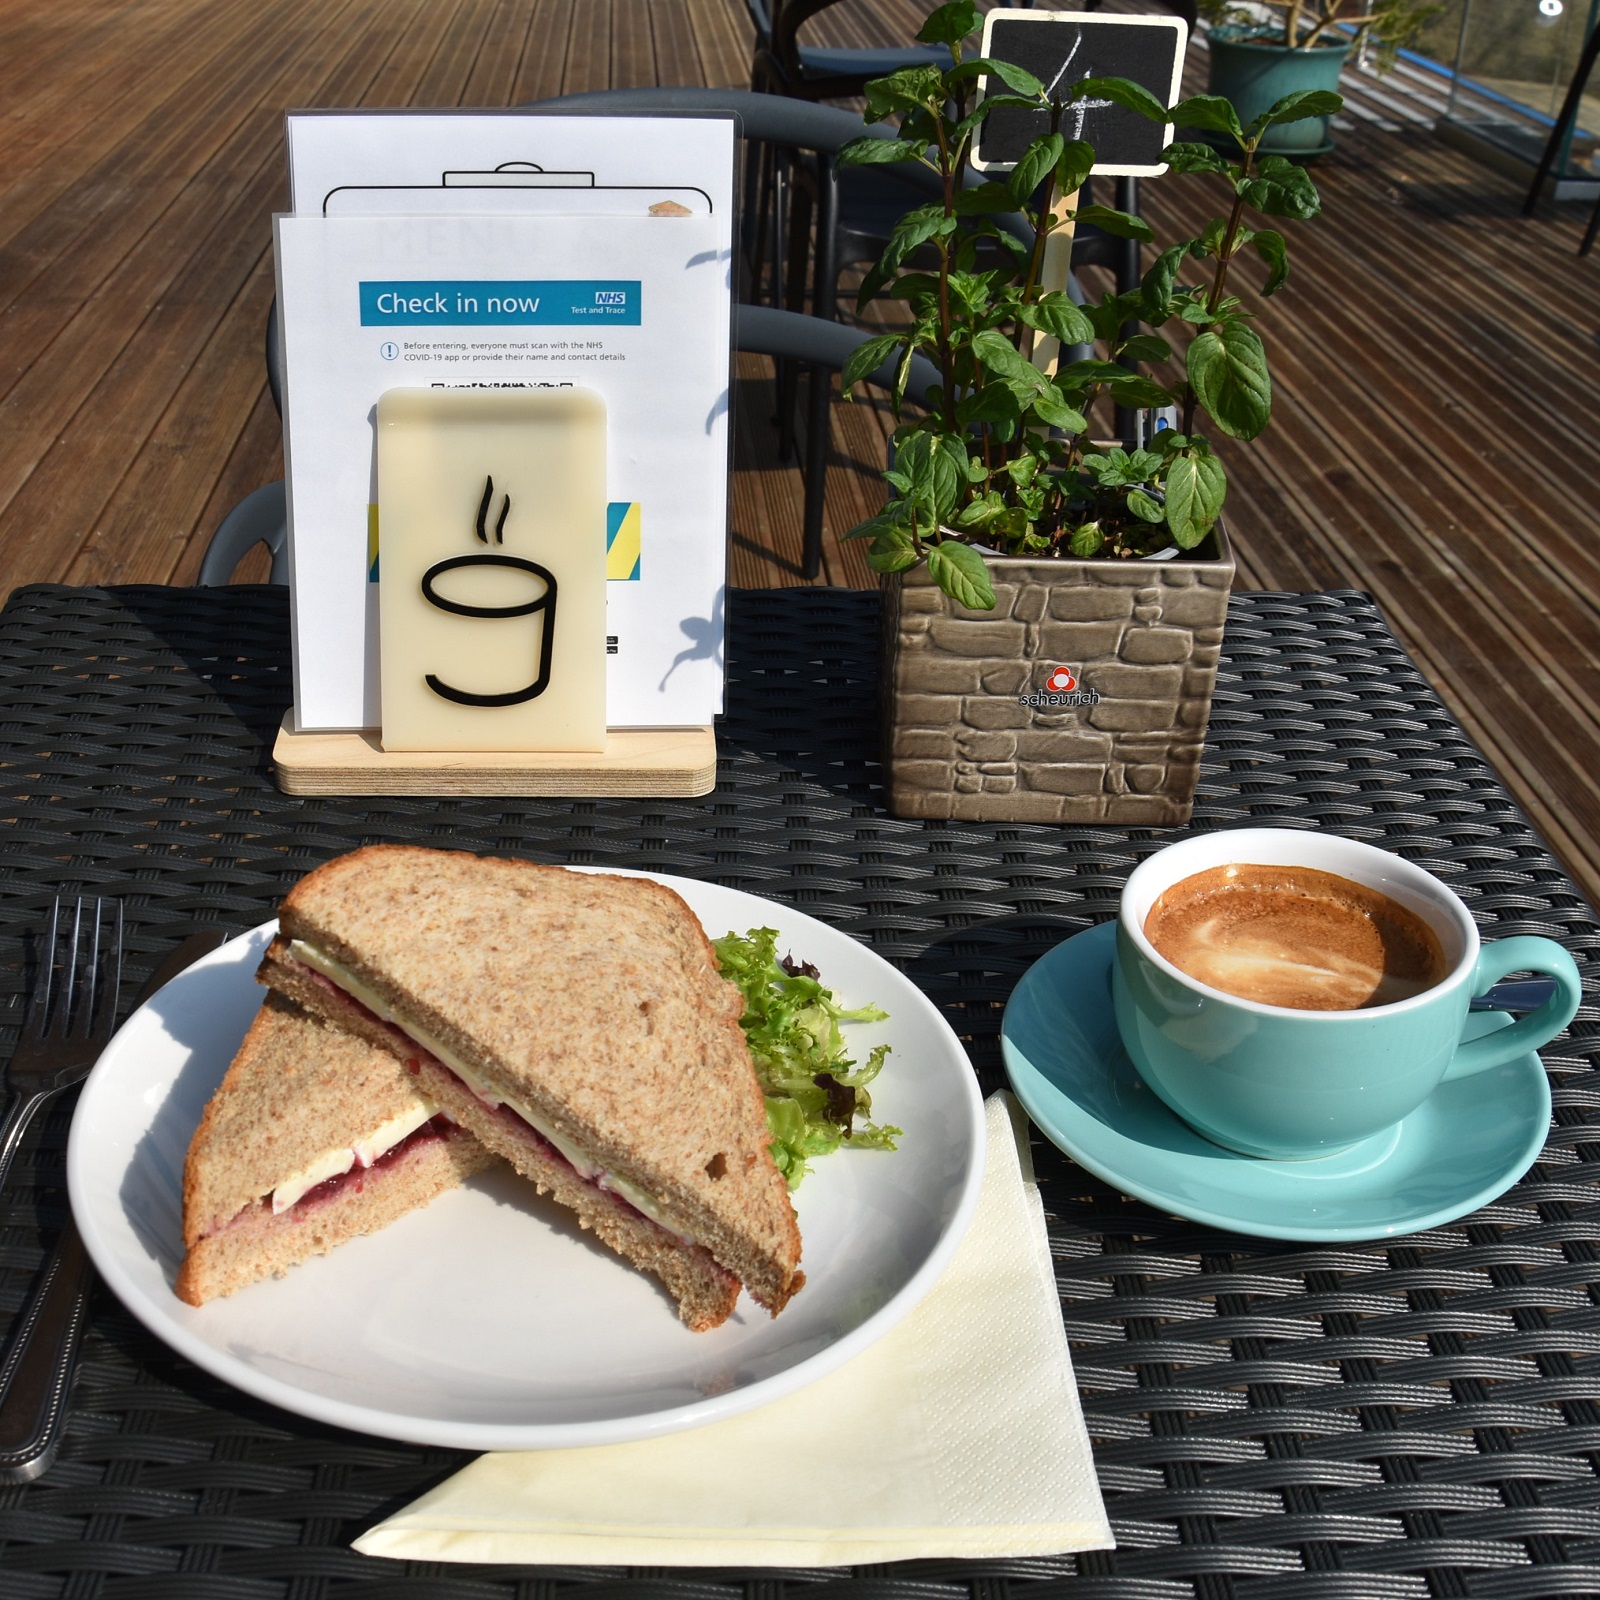 My brie and cranberry sandwich, along with my flat white, sitting in the sun on the patio at Open Grounds Café.